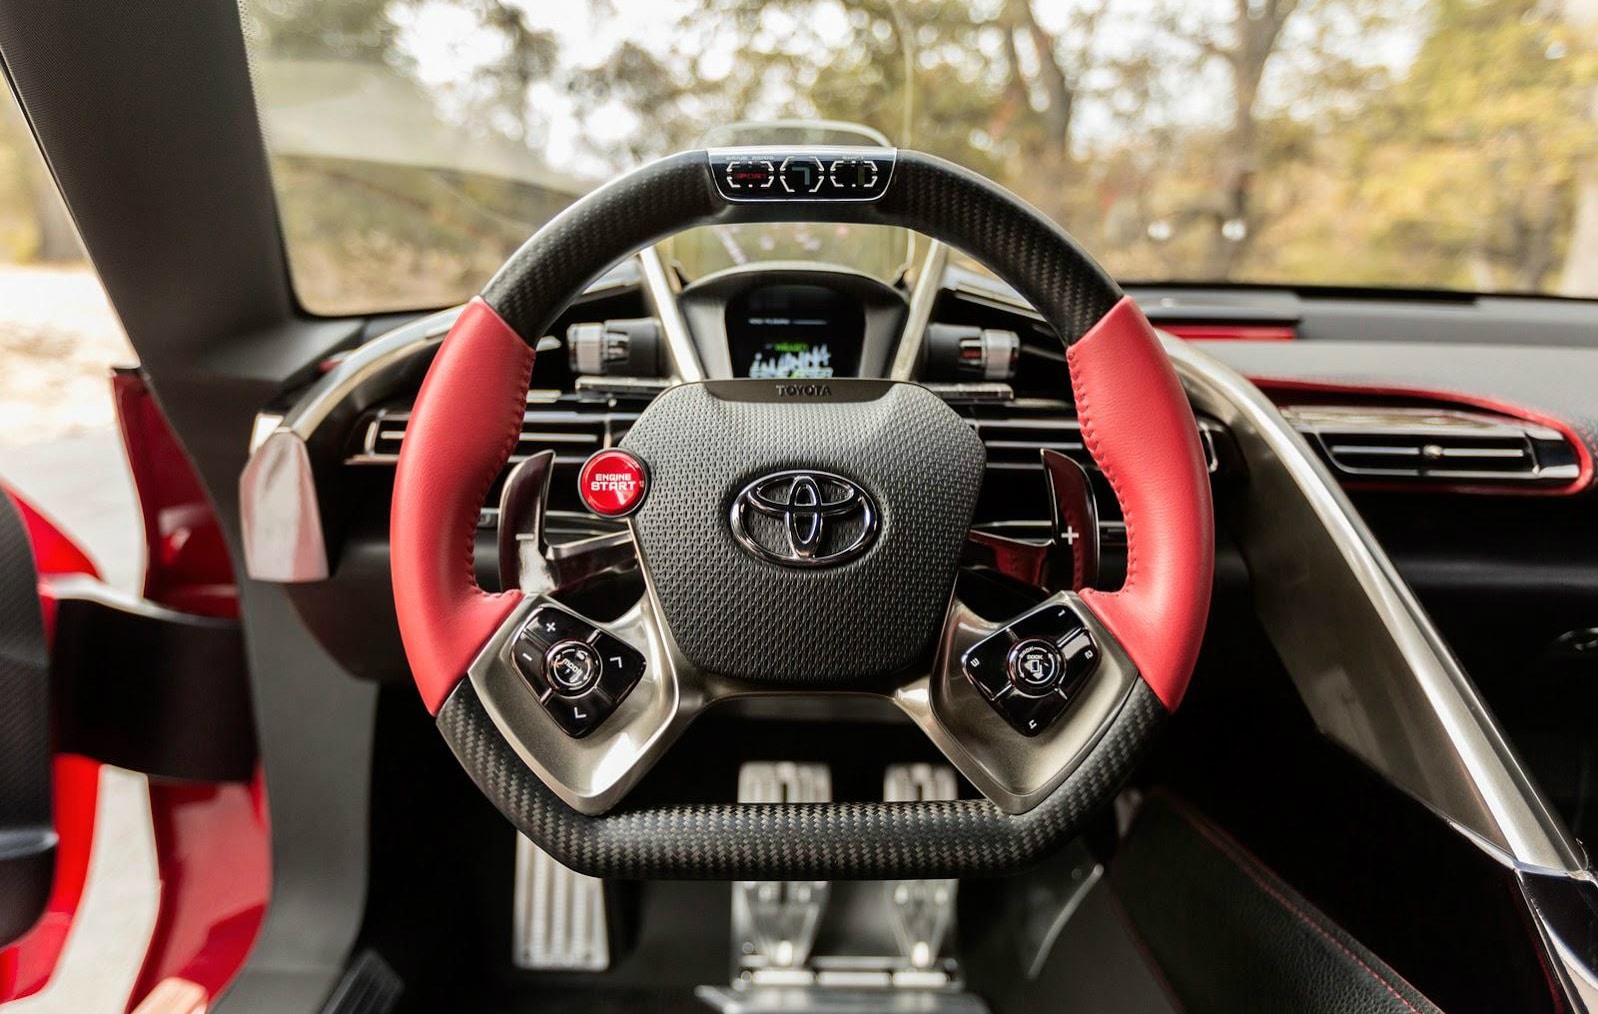 Toyota FT Steering Wheel front view